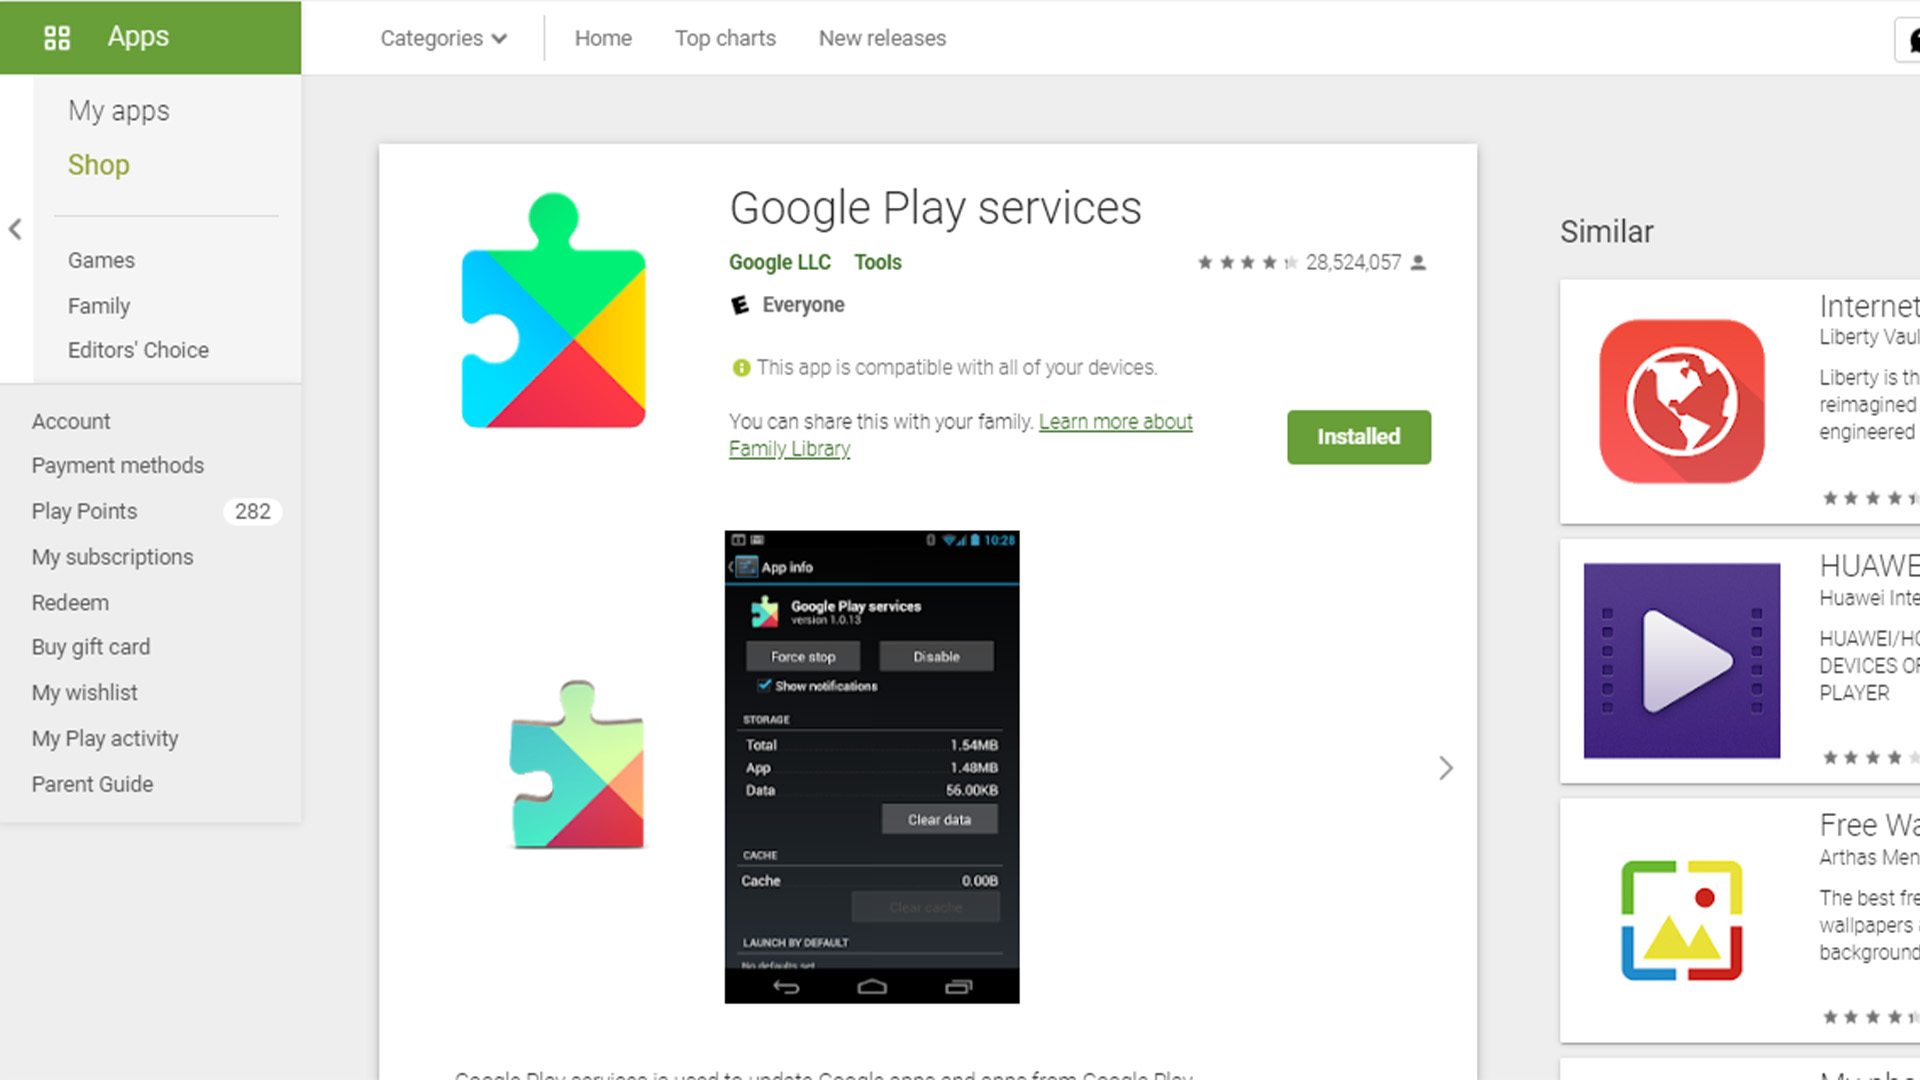 Google Play Services播放商店页面